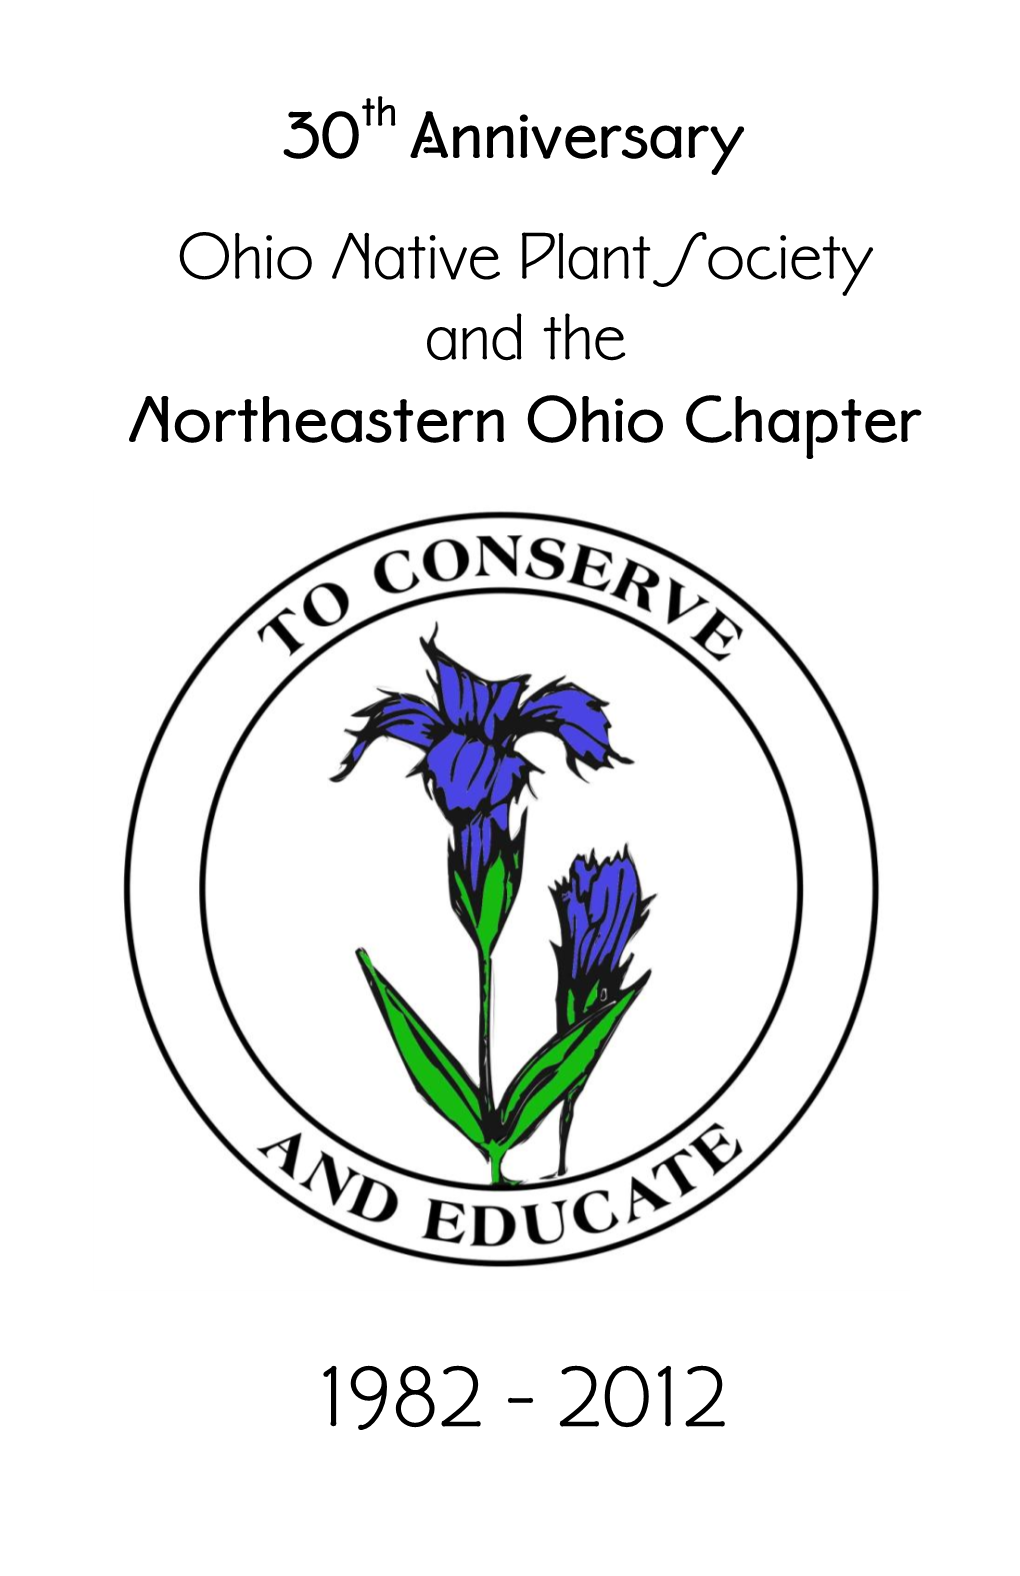 Ohio Native Plant Society and the Northeastern Ohio Chapter